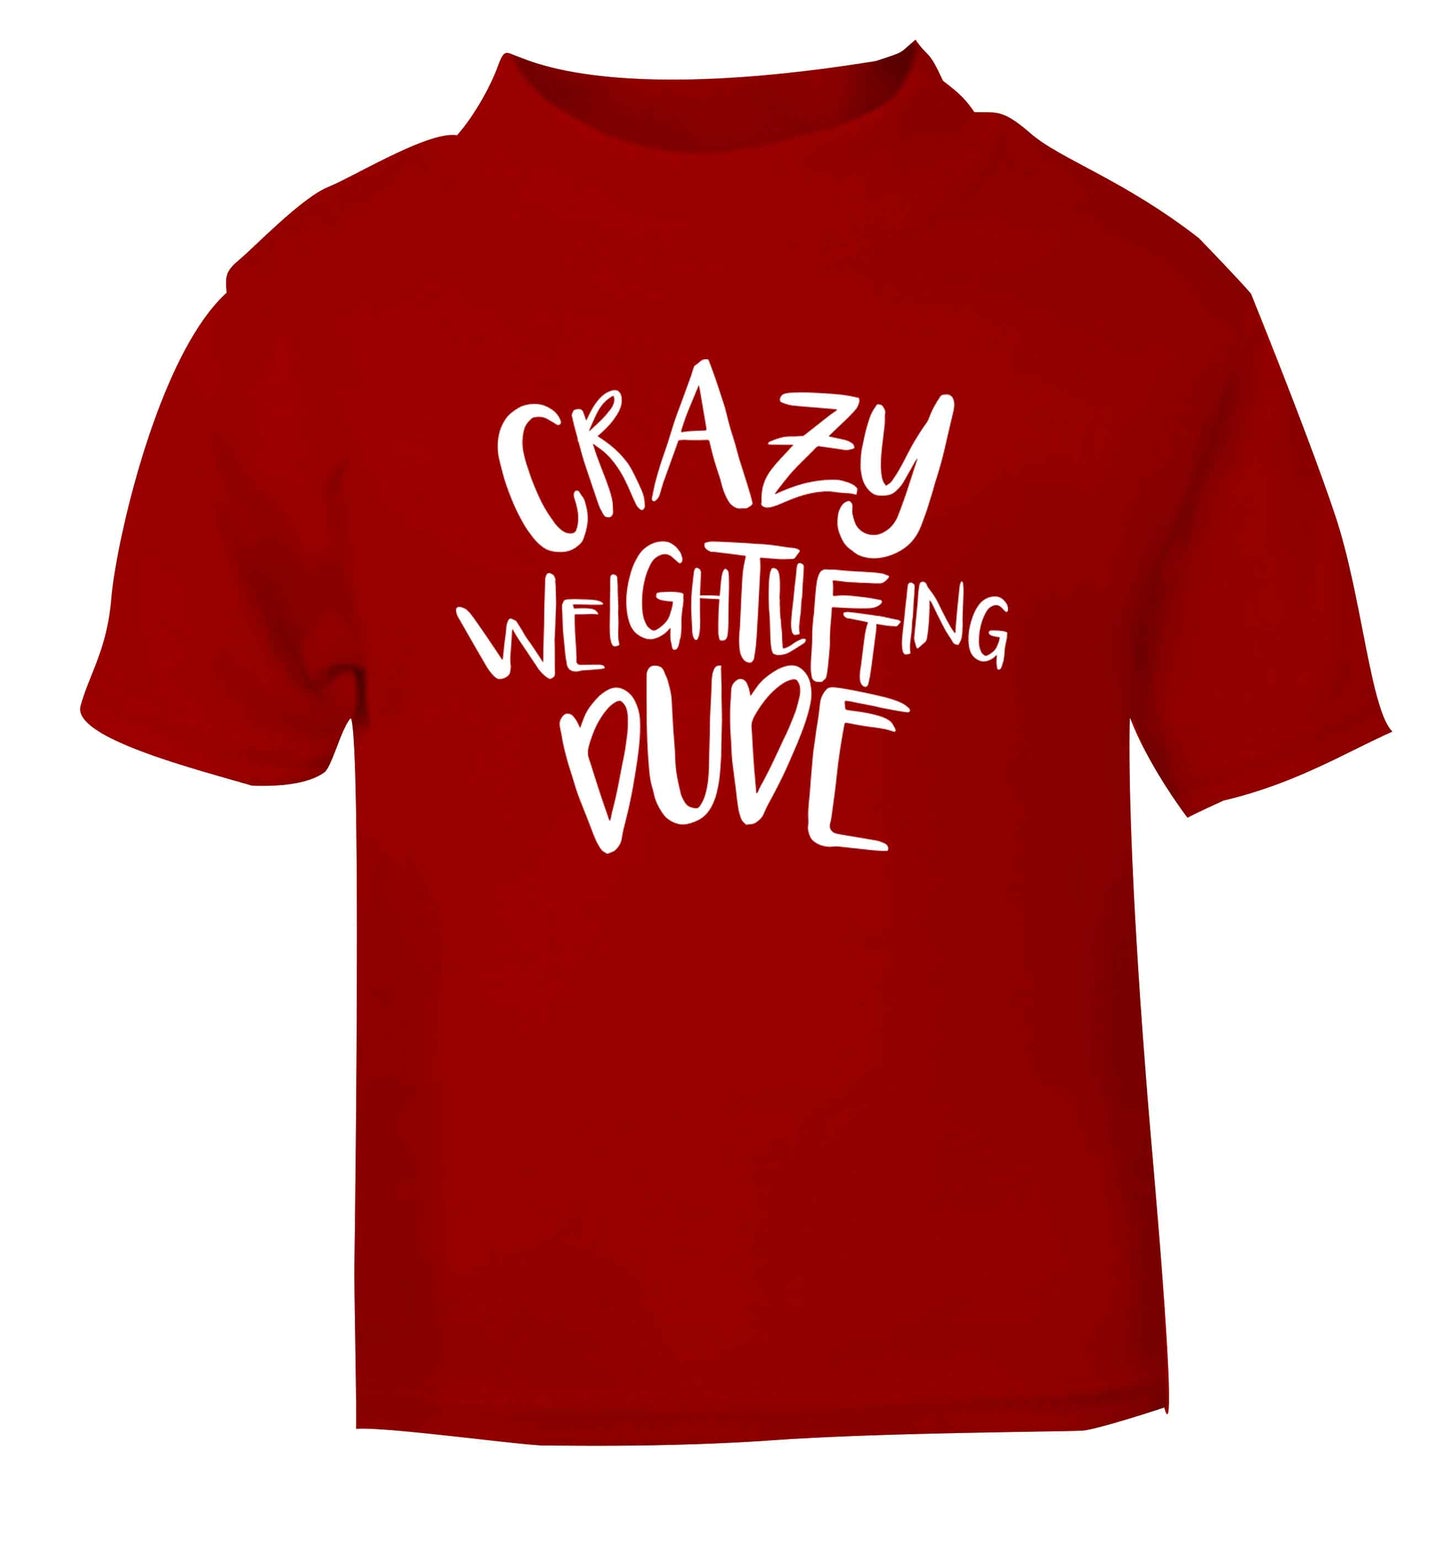 Crazy weightlifting dude red Baby Toddler Tshirt 2 Years